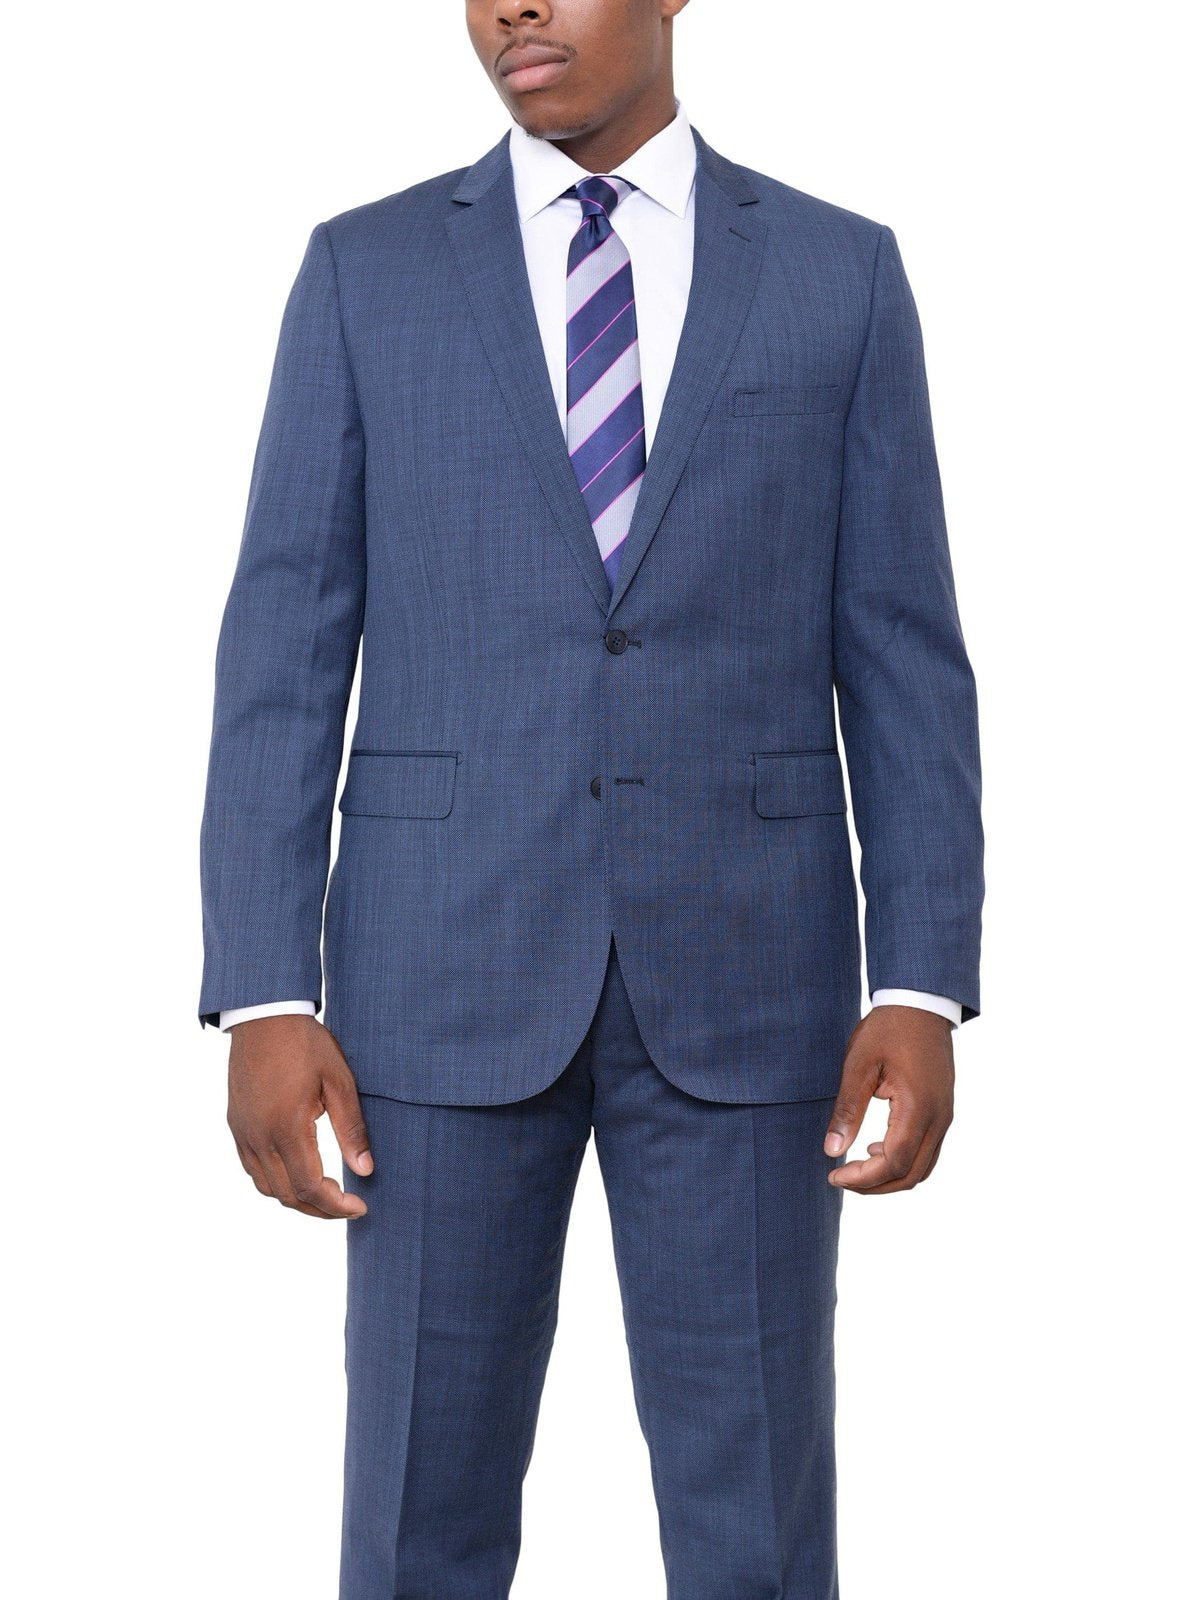 London Fog TWO PIECE SUITS Slim Fit Blue Nailhead Two Button Wool Suit